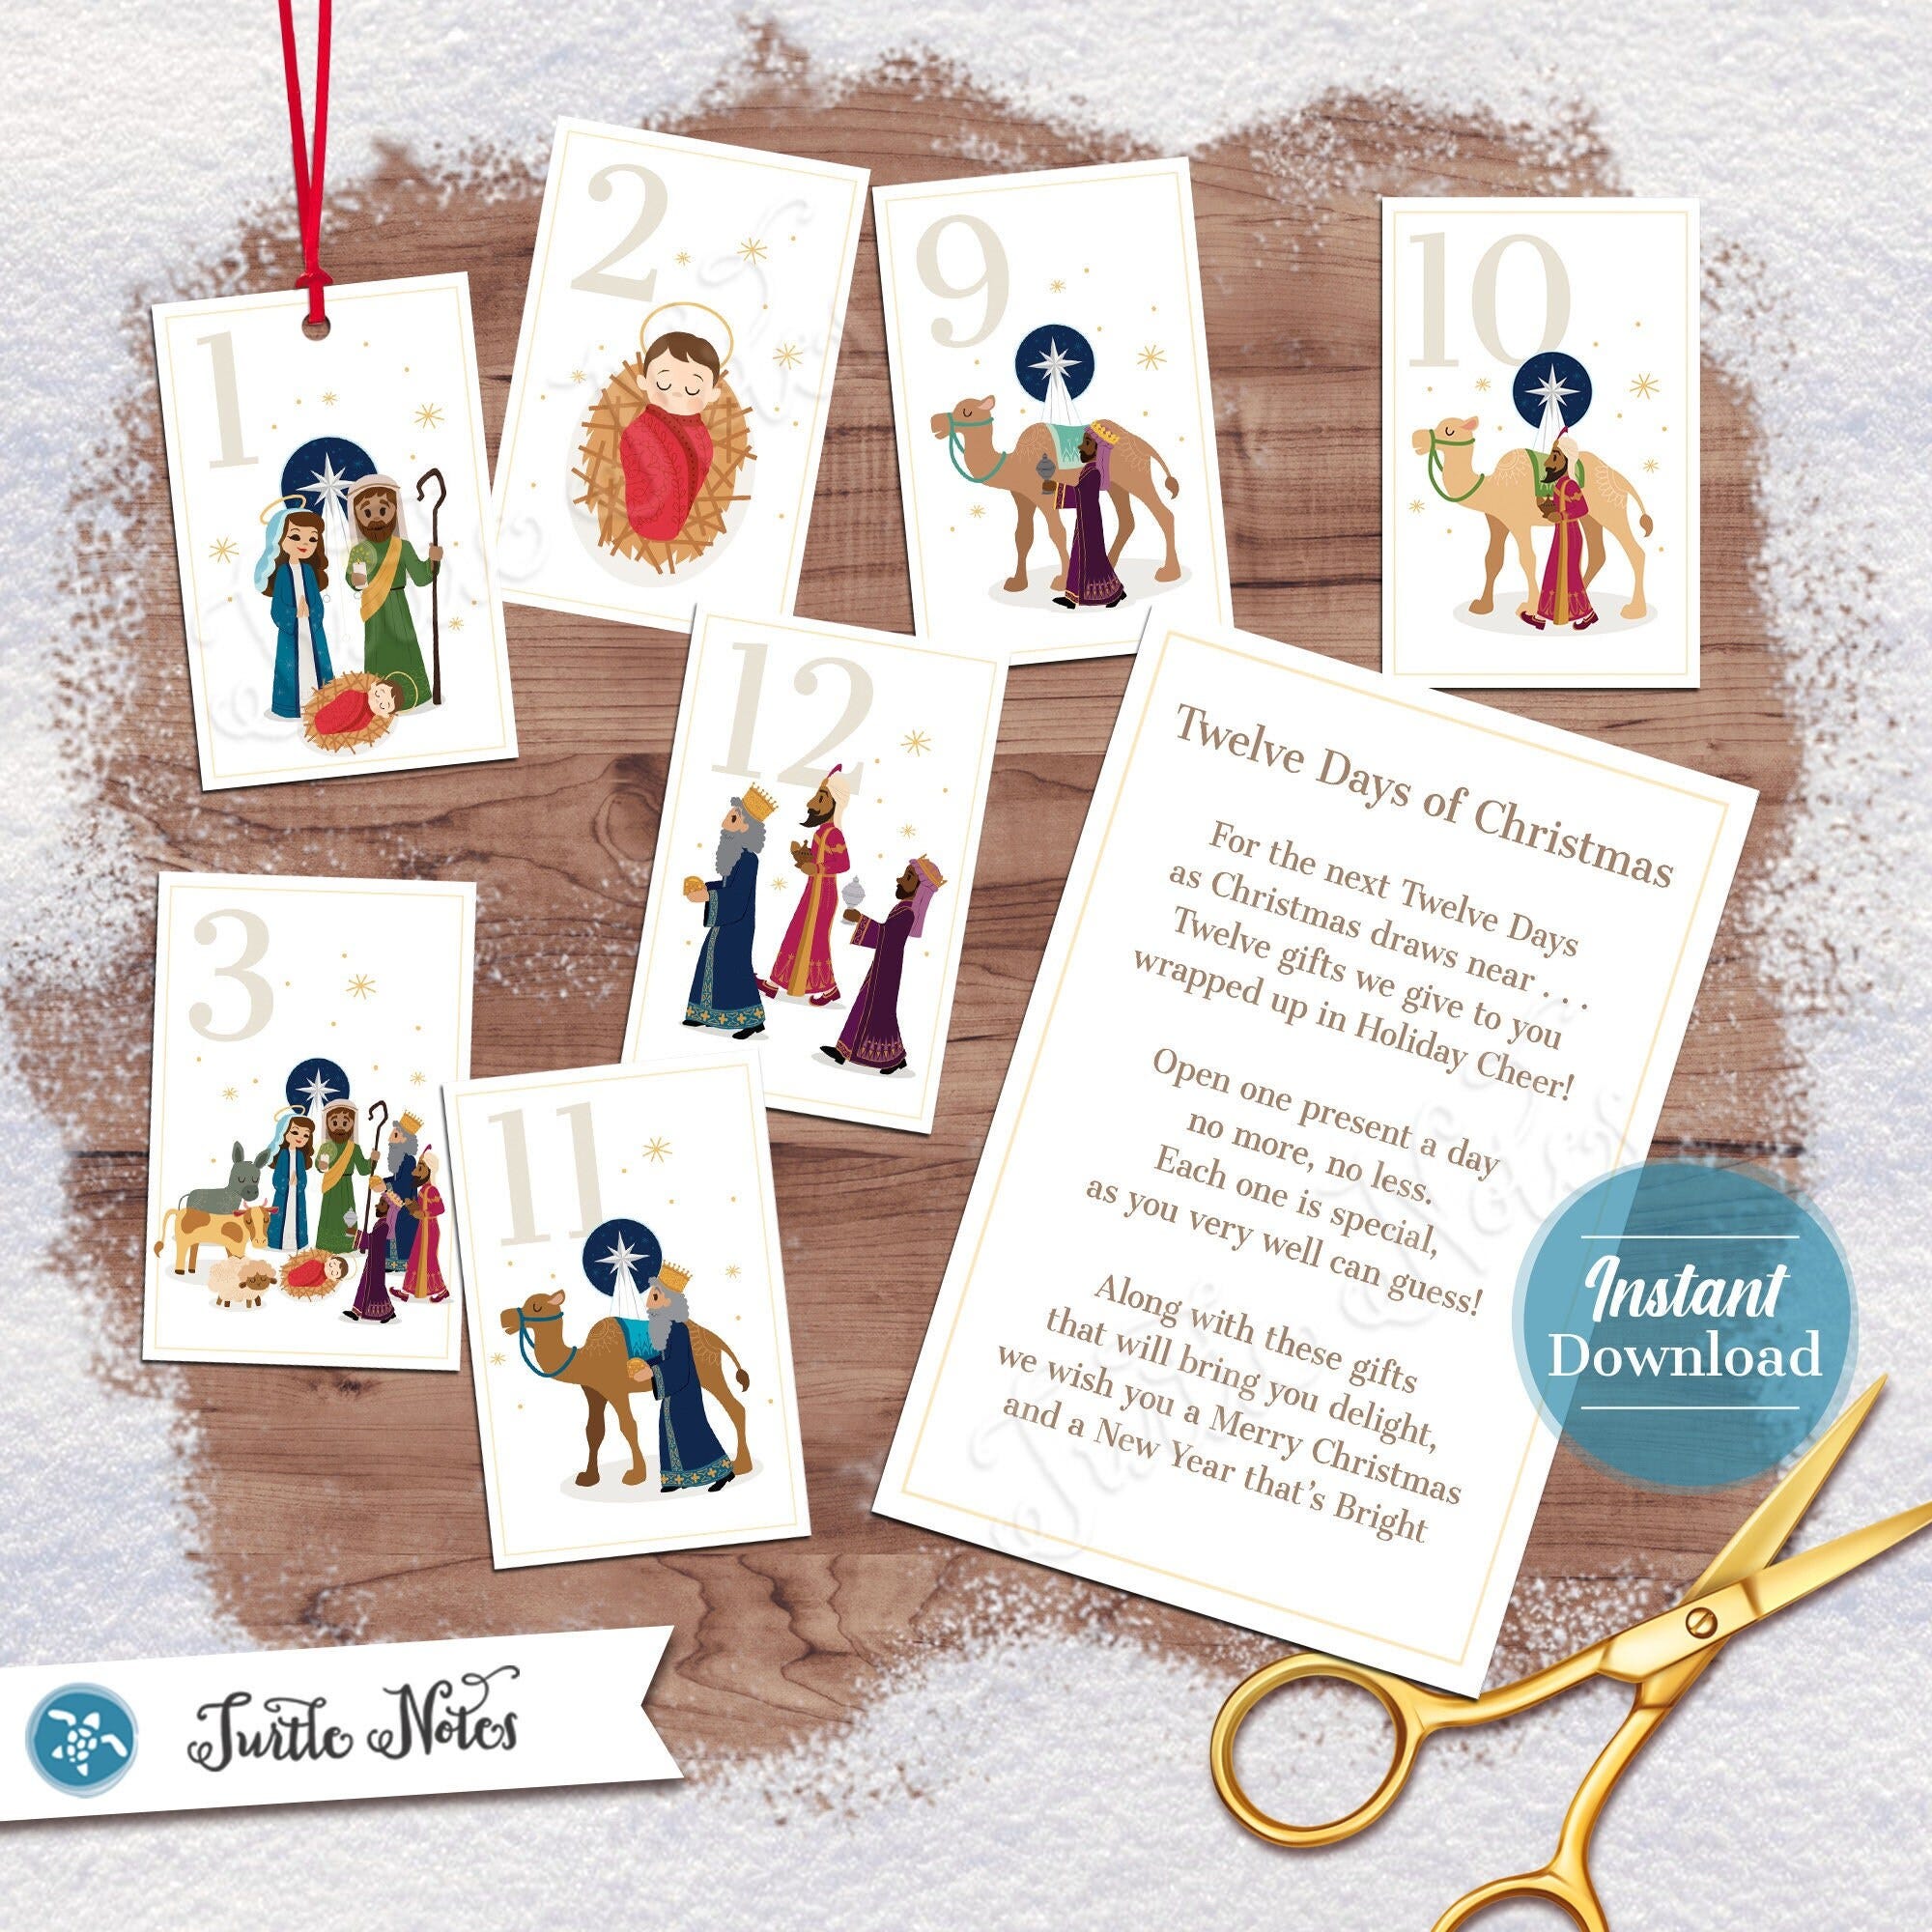 Nativity themed 12 Days of Christmas Gift Tags with Gift Poem | Digital Printable Labels or Stickers for 12 Days of Christmas Gifts CT012